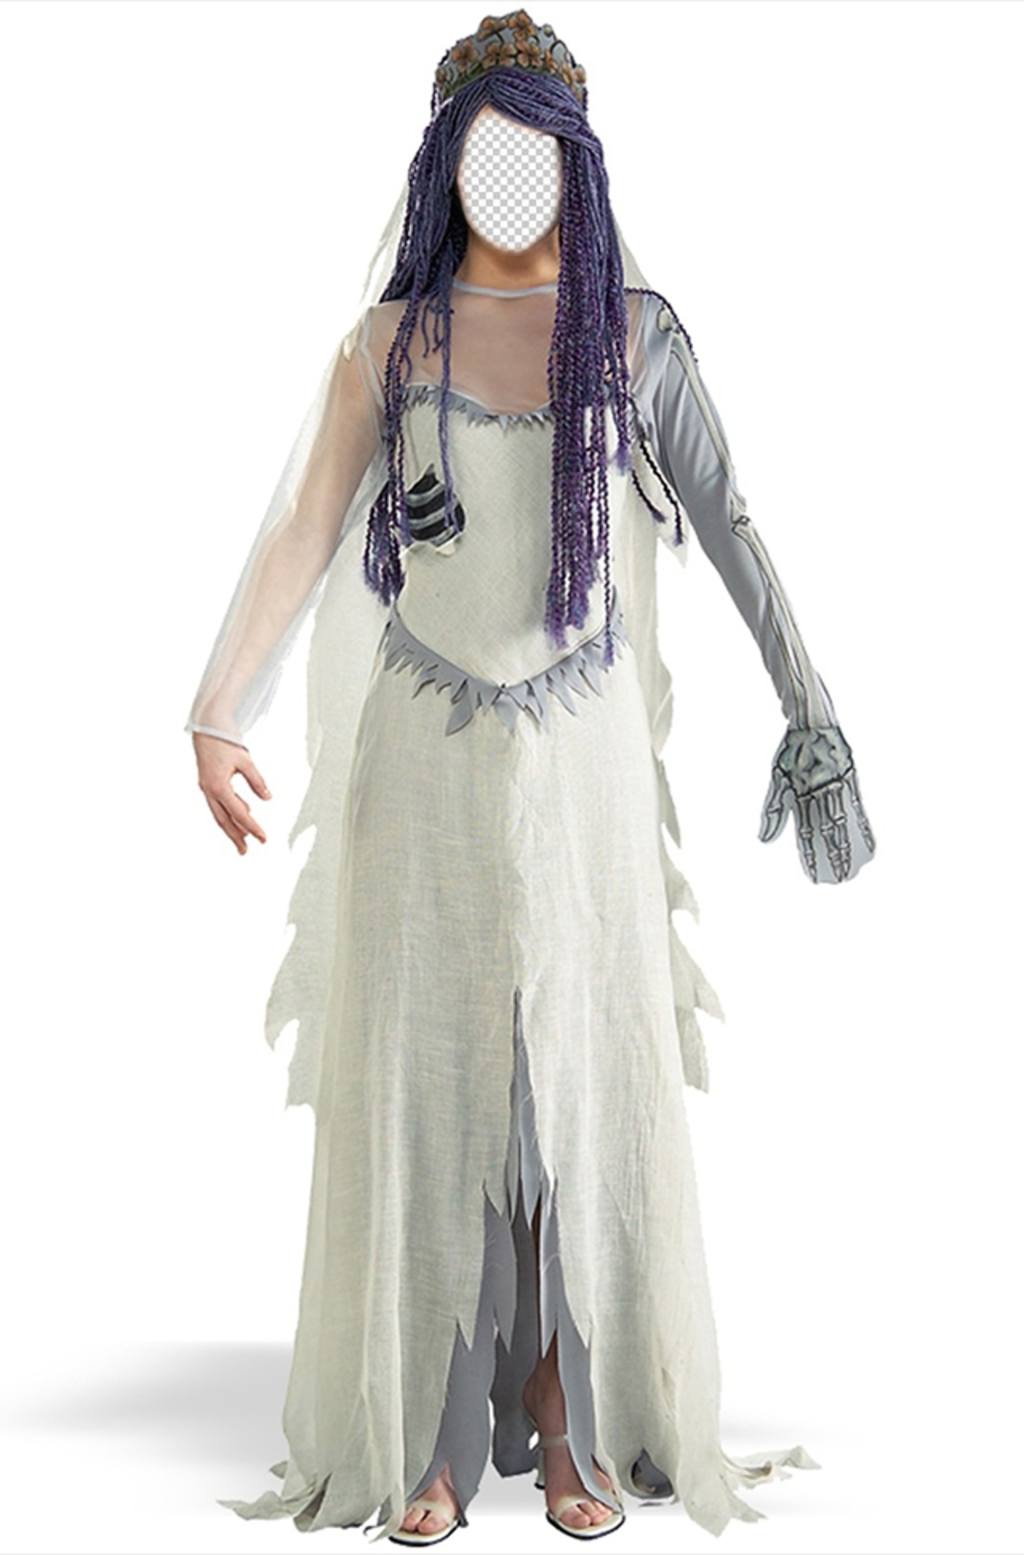 Photomontage of a costume of Corpse Bride you can edit online ..